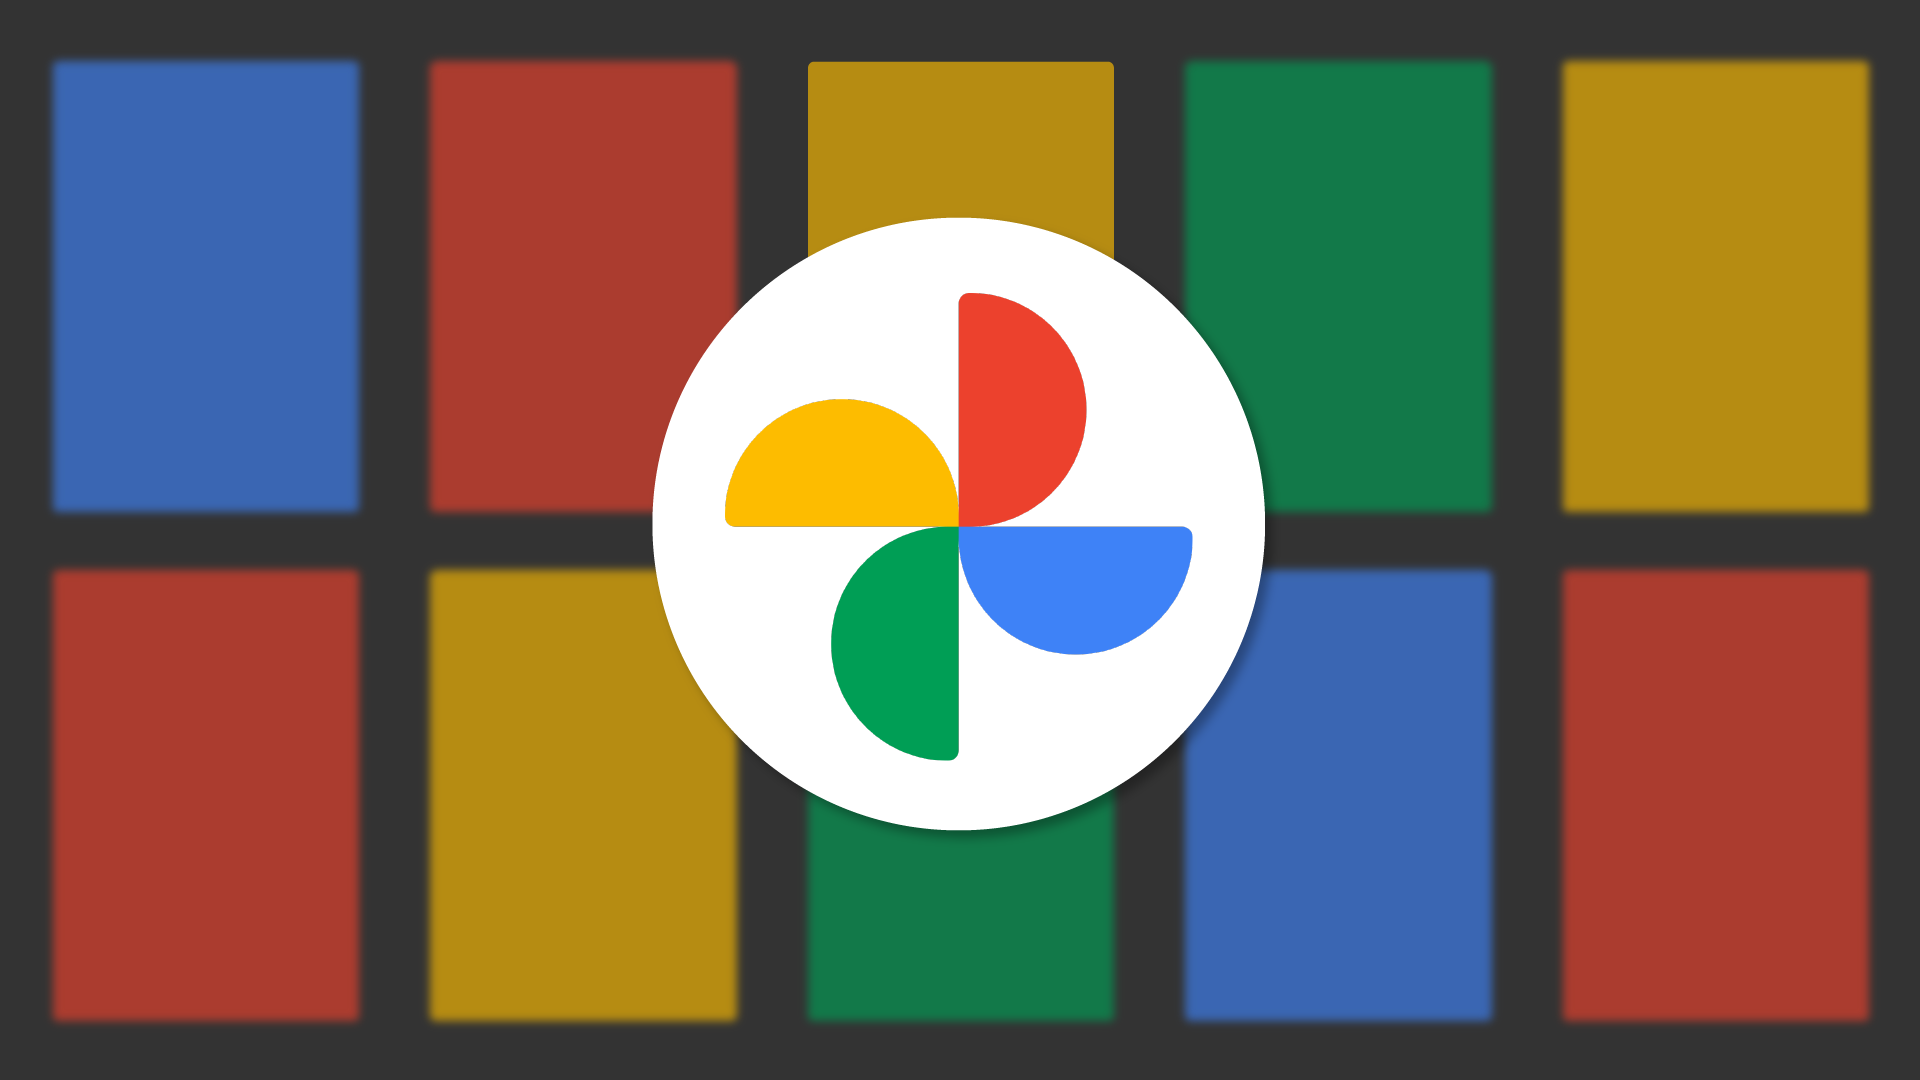 Adding a New Feature to Google Photos